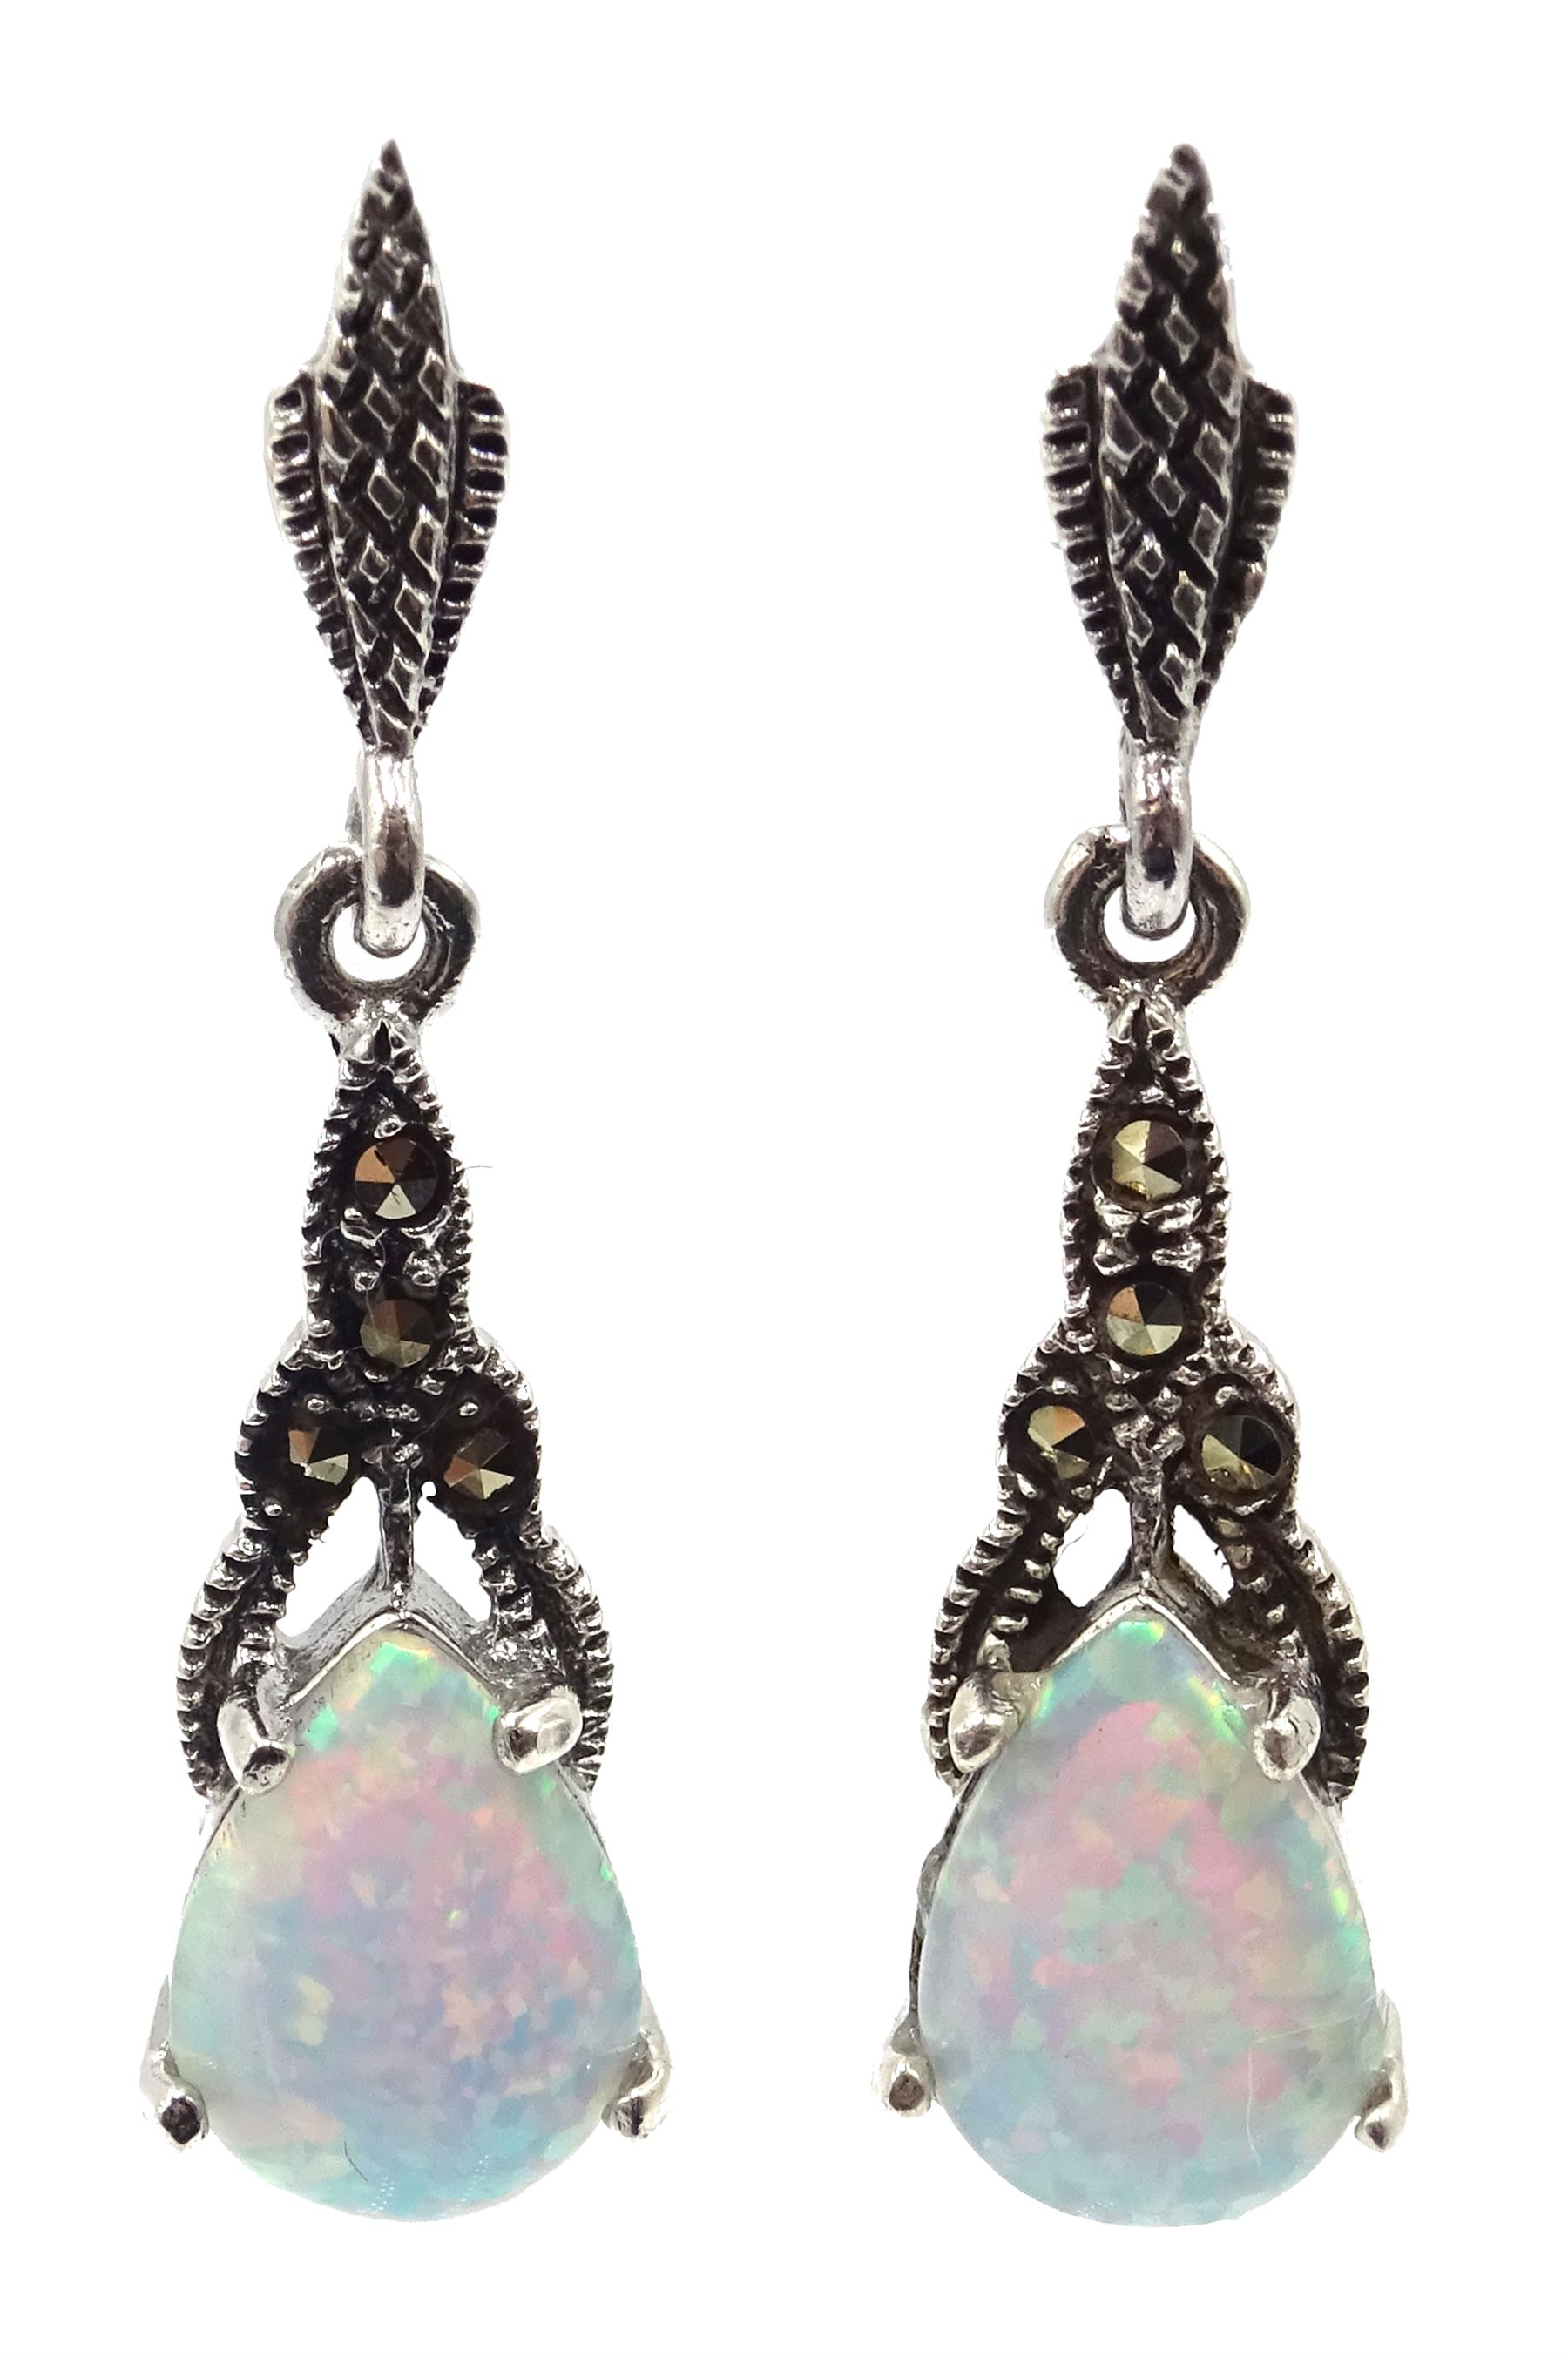 Pair of silver opal and marcasite pendant earrings